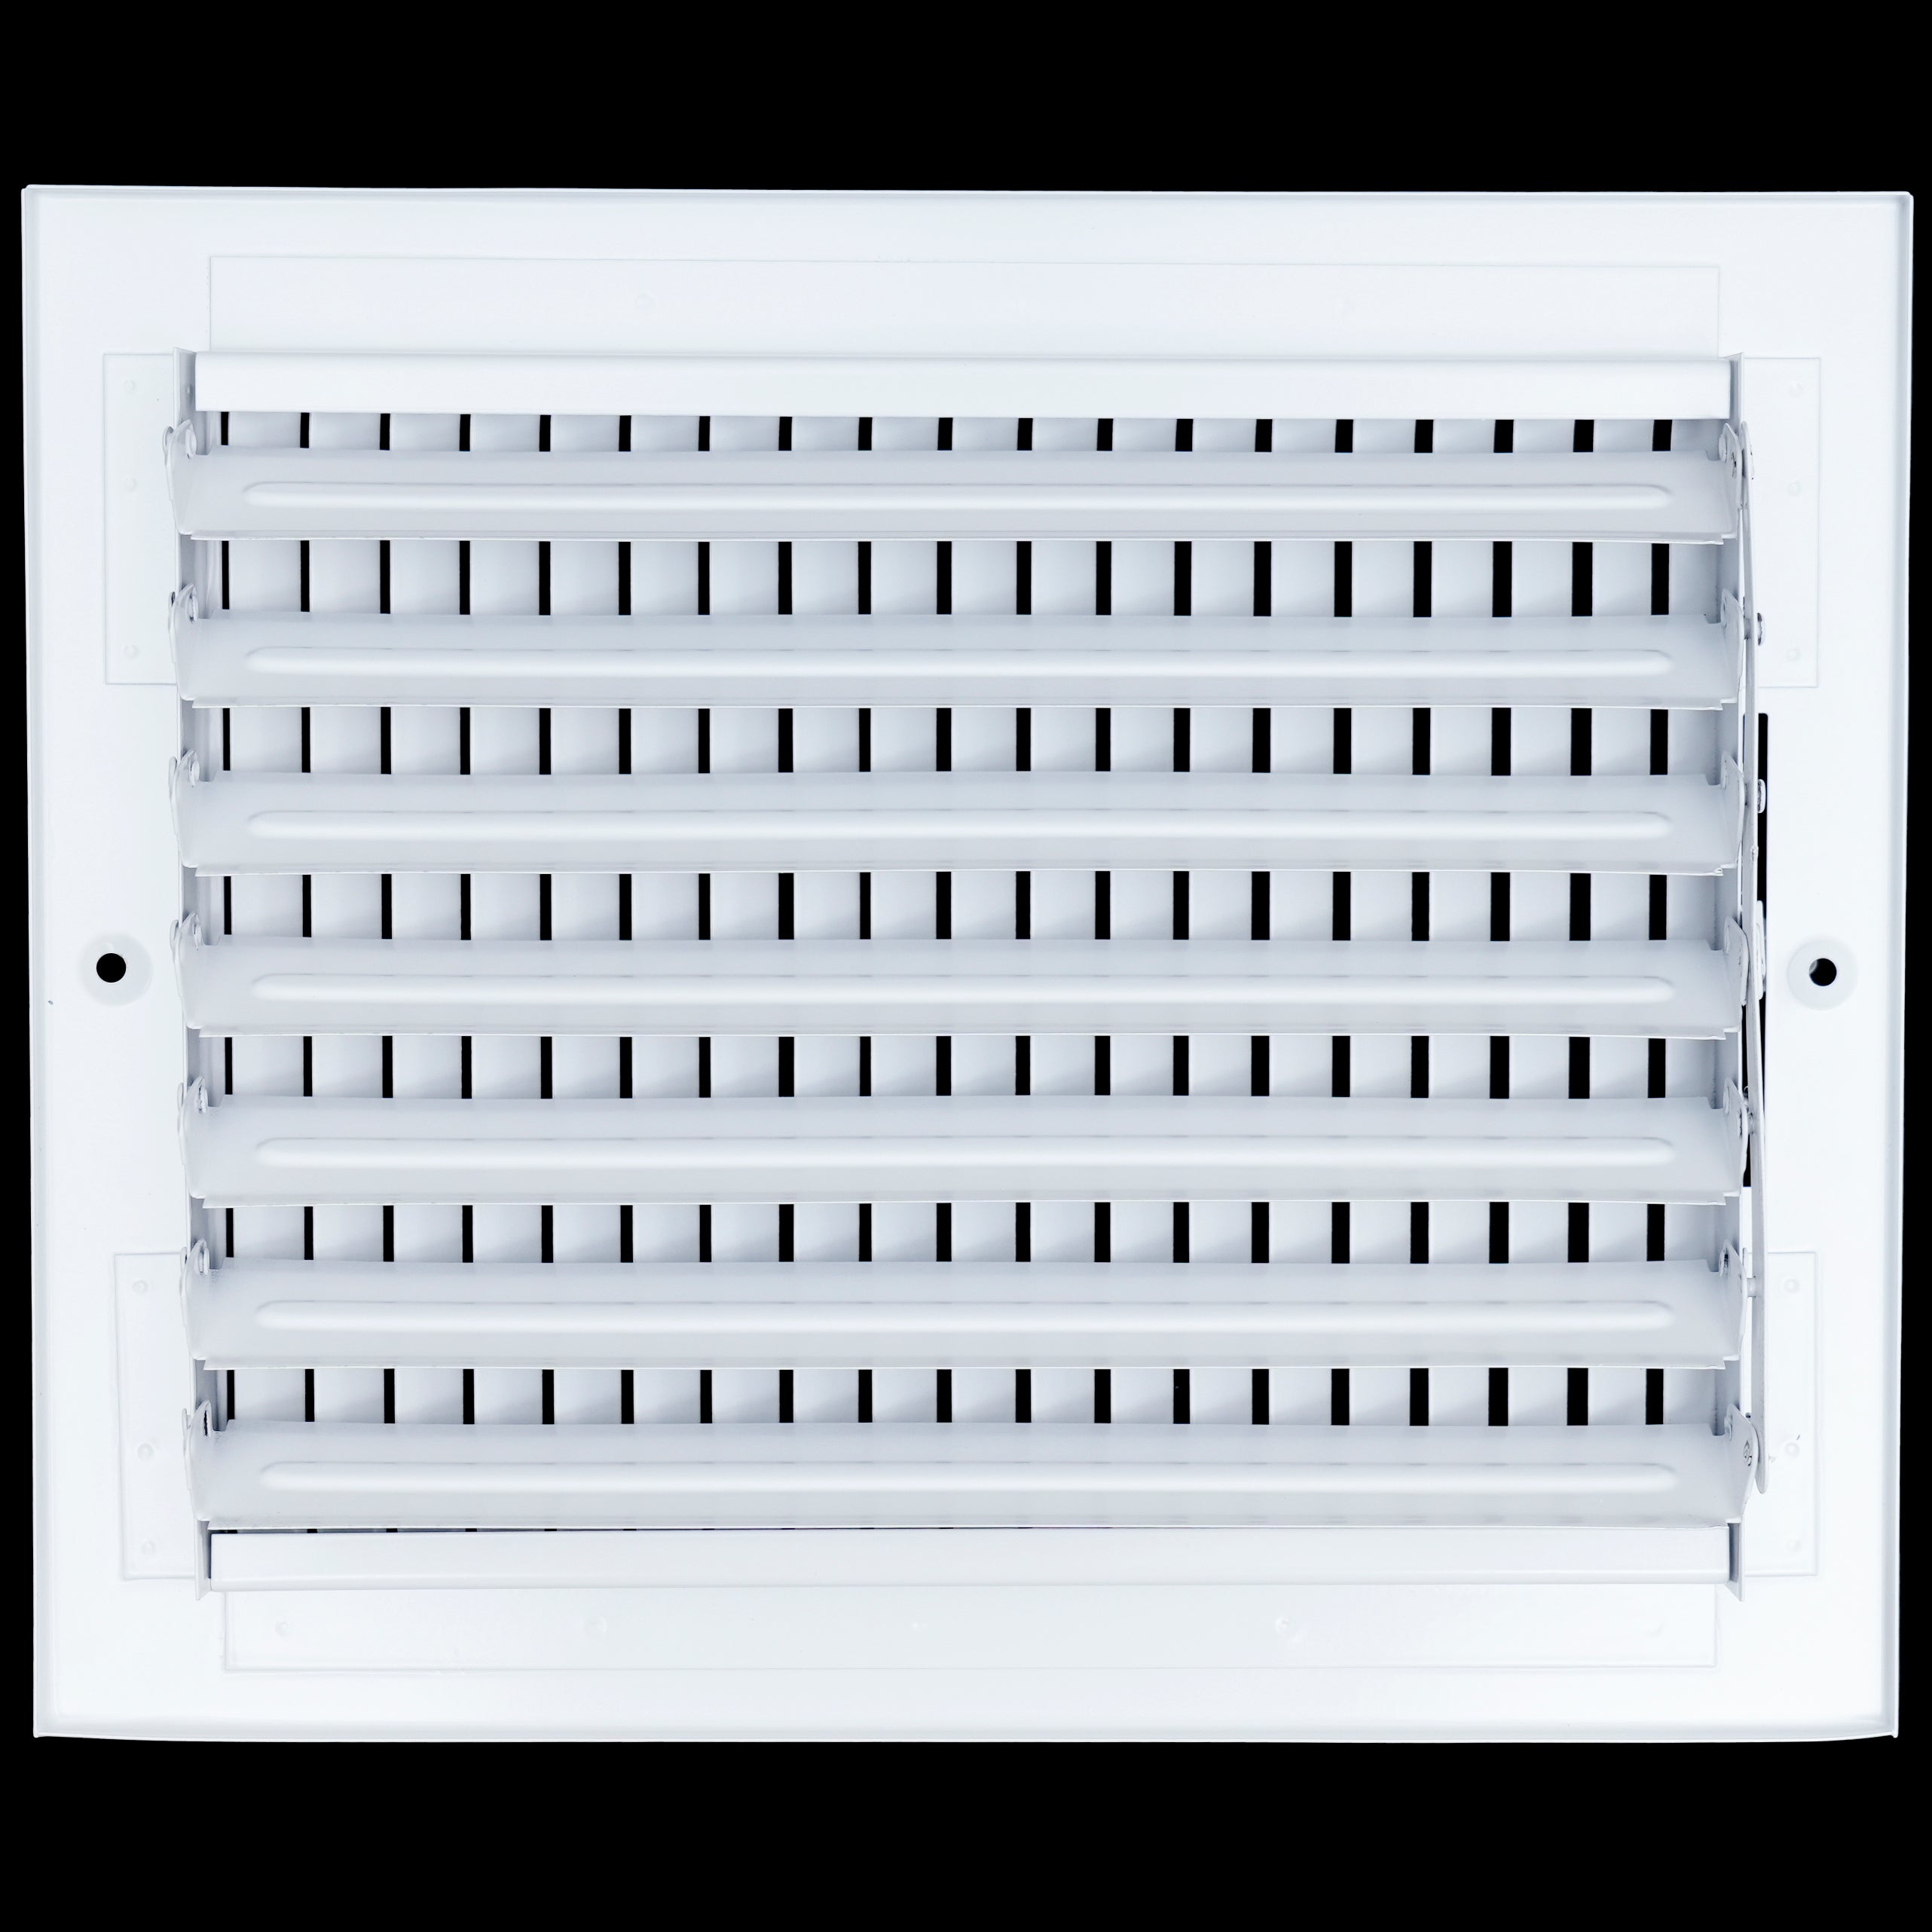 10 X 8 Duct Opening | 1 WAY Steel Air Supply Diffuser for Sidewall and Ceiling